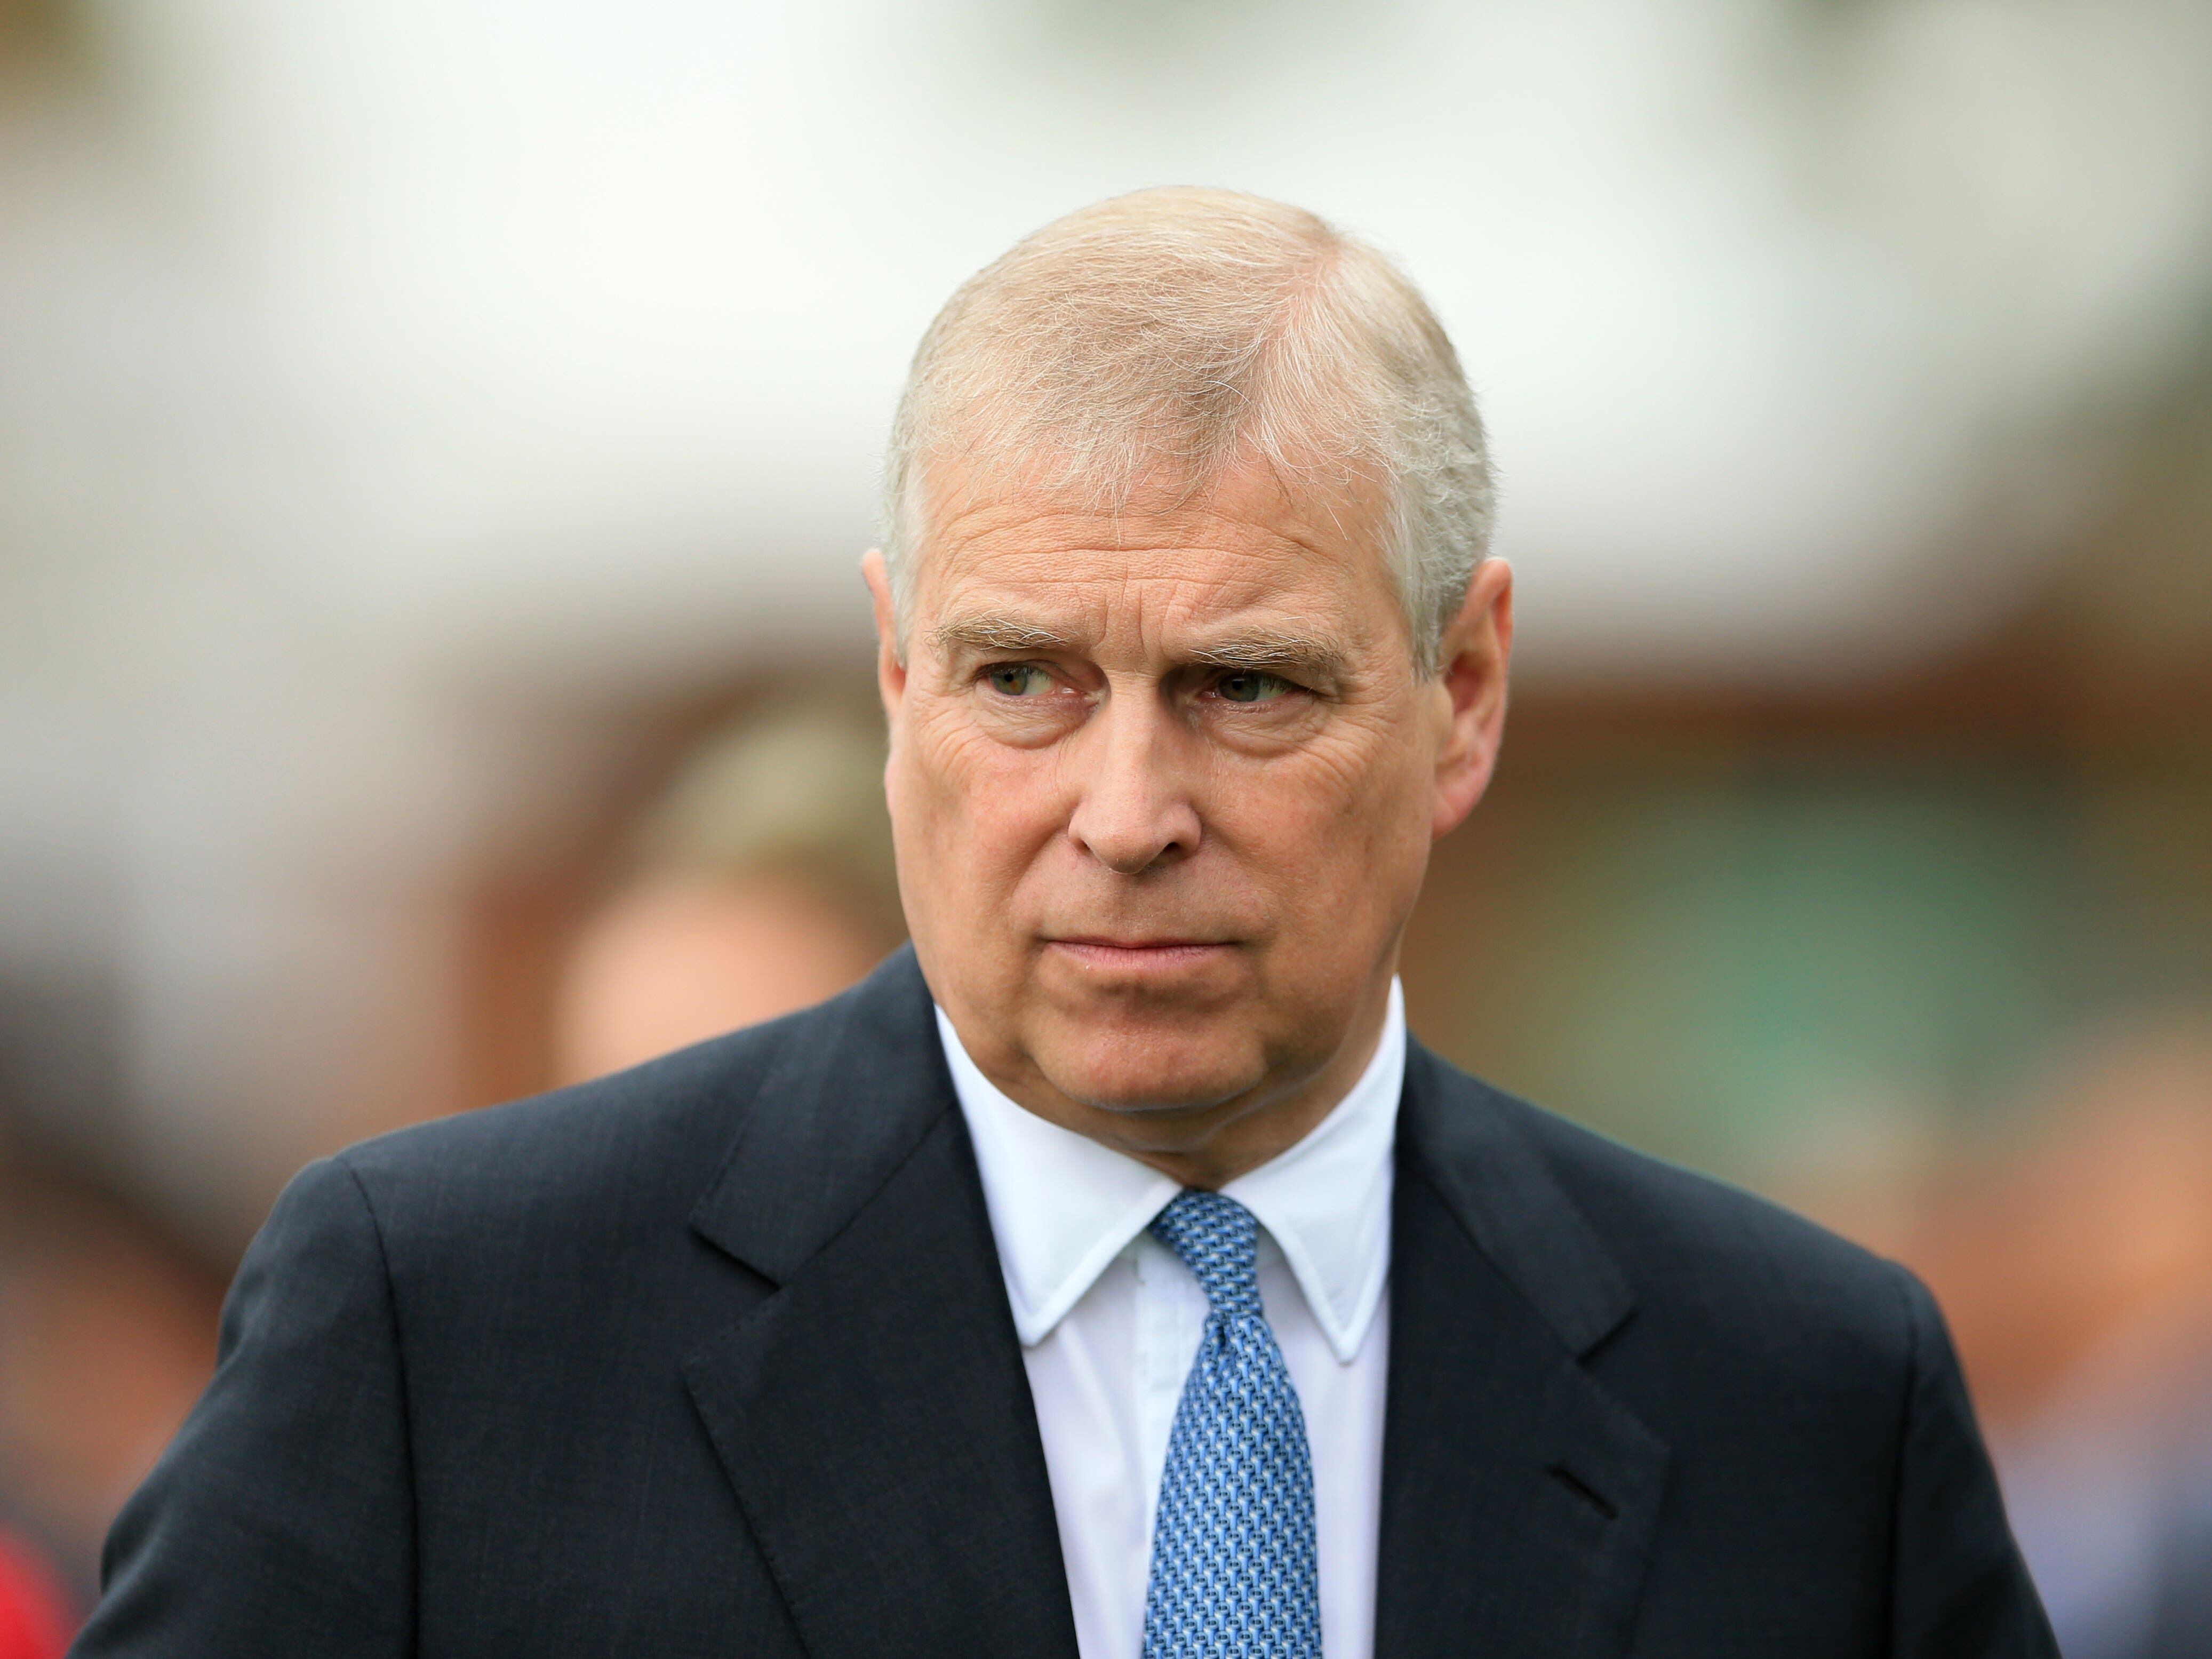 Full statement on the Duke of York and Virginia Giuffre’s settlement